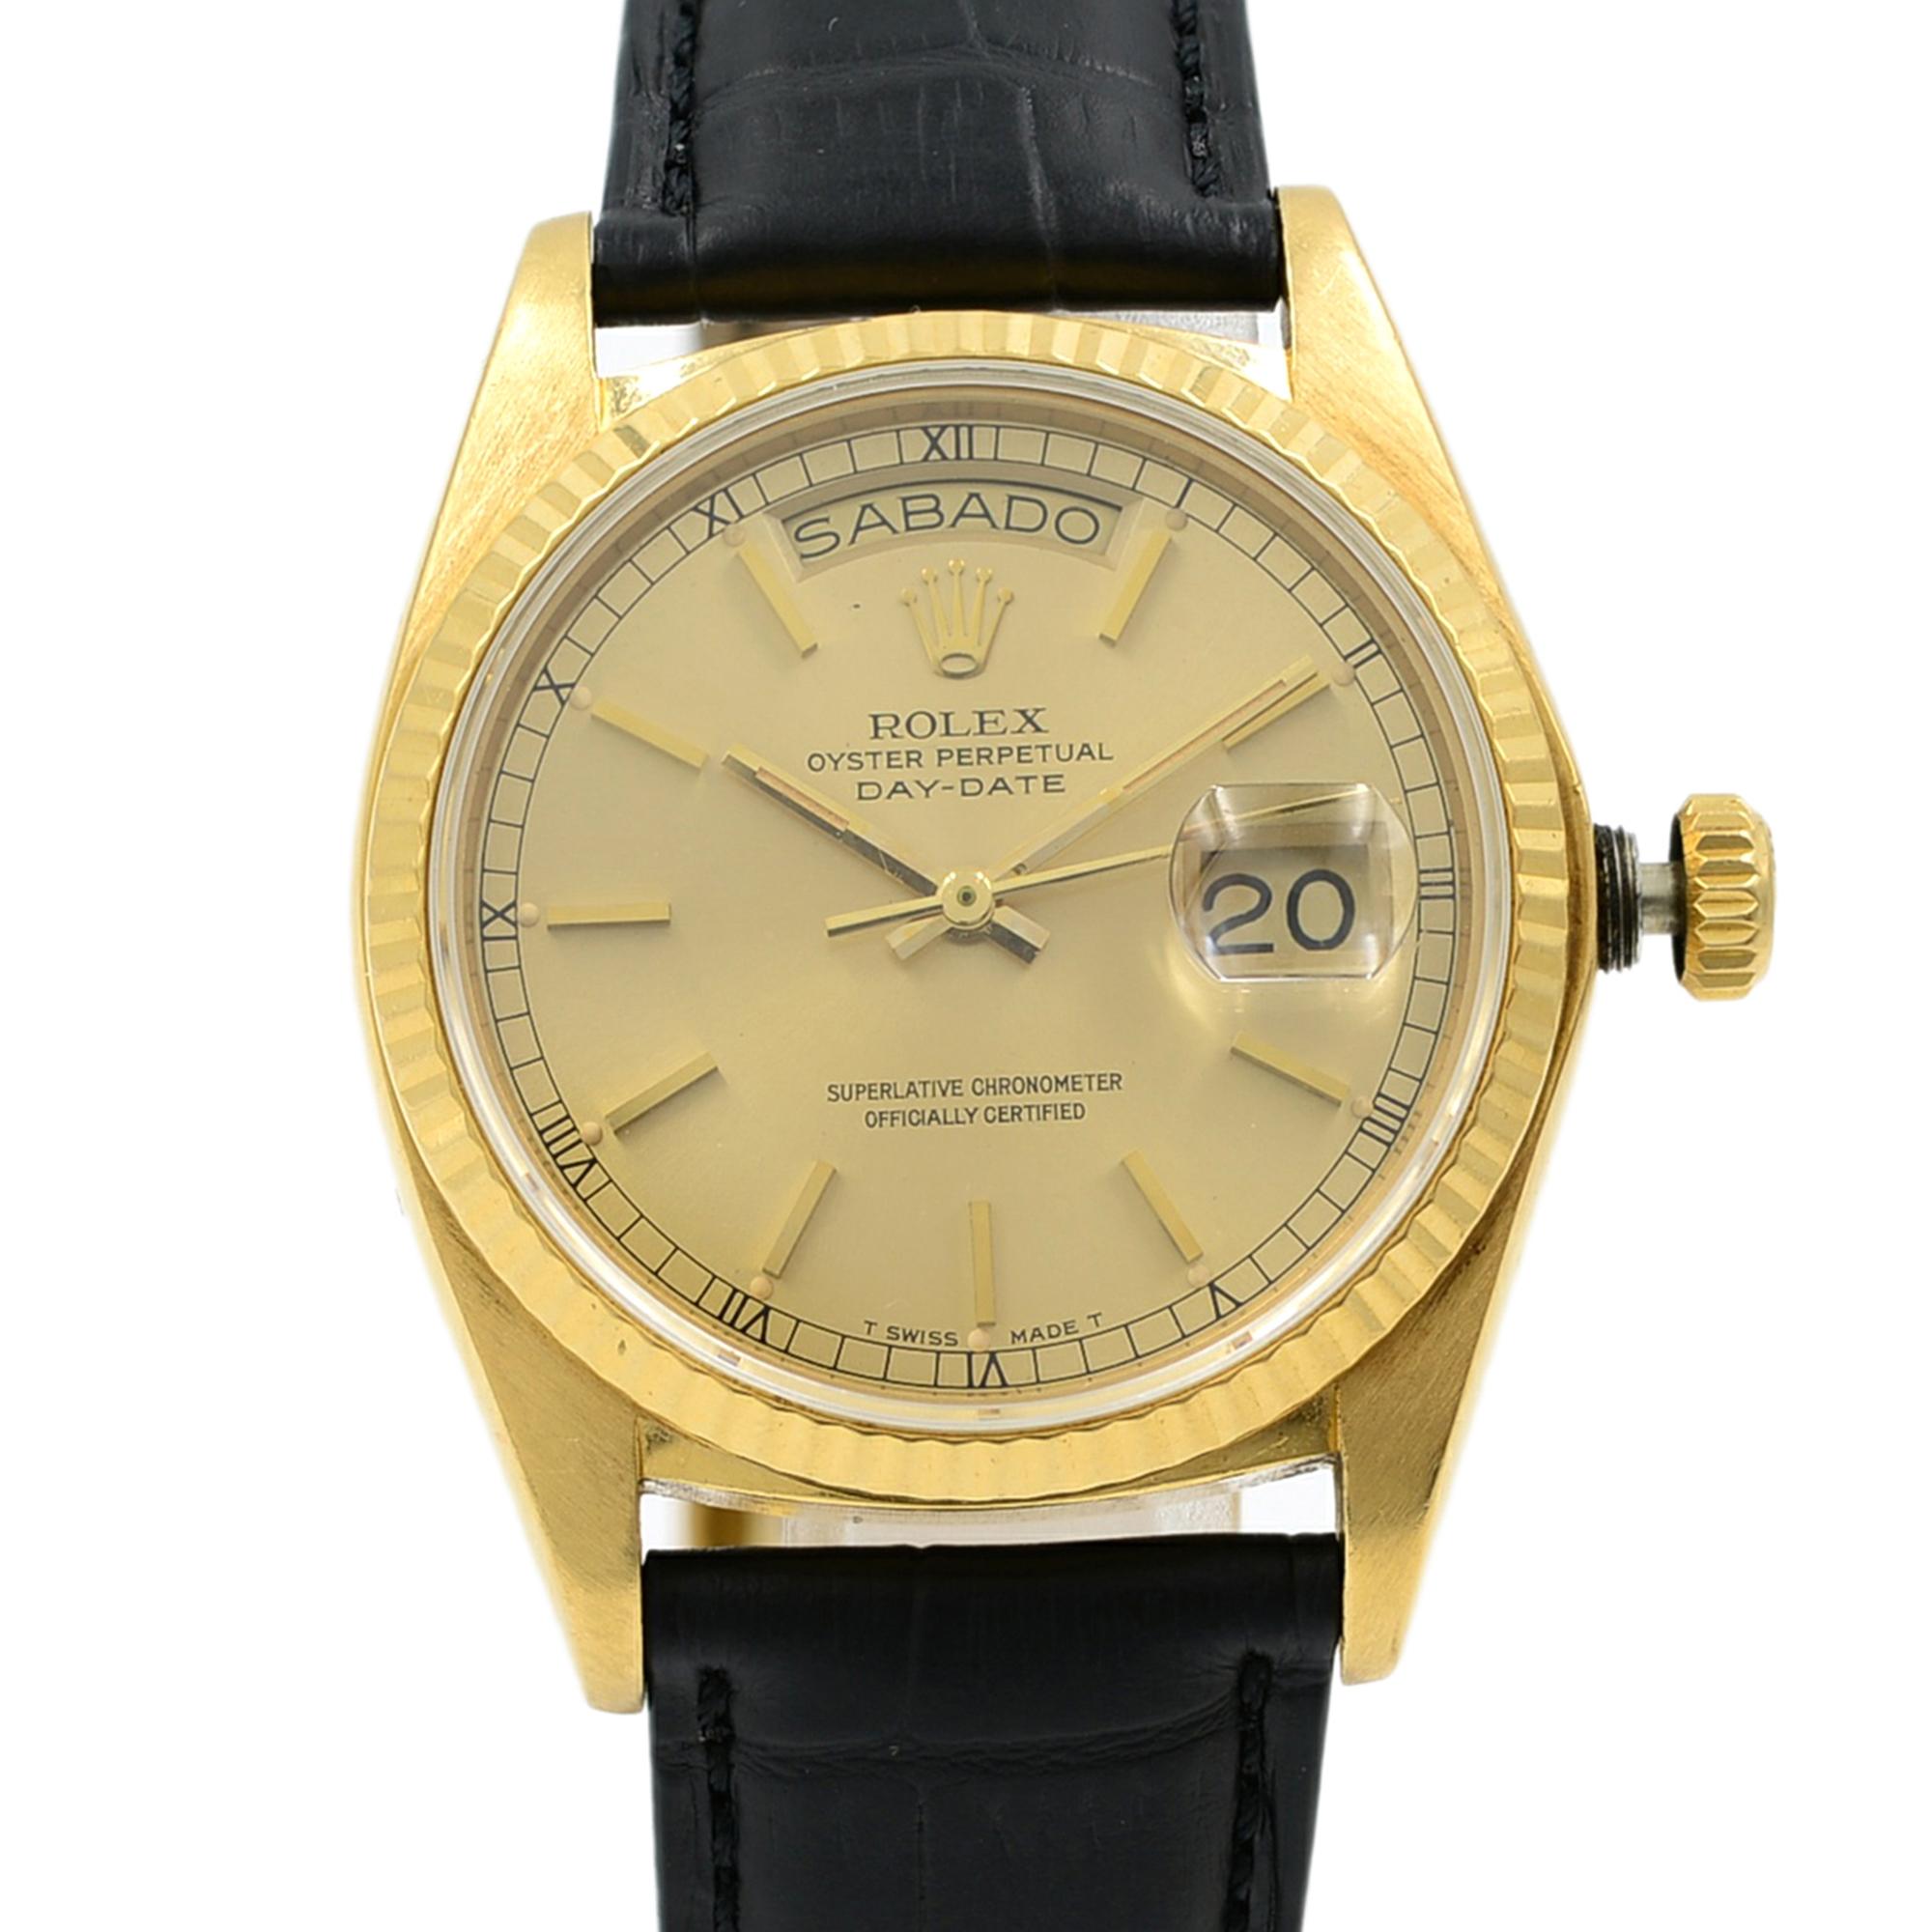 This pre-owned Rolex Day-Date 18038 is a beautiful Ladies timepiece that is powered by an automatic movement which is cased in a yellow gold case. It has a round shape face, day & date dial and has hand sticks style markers. It is completed with a